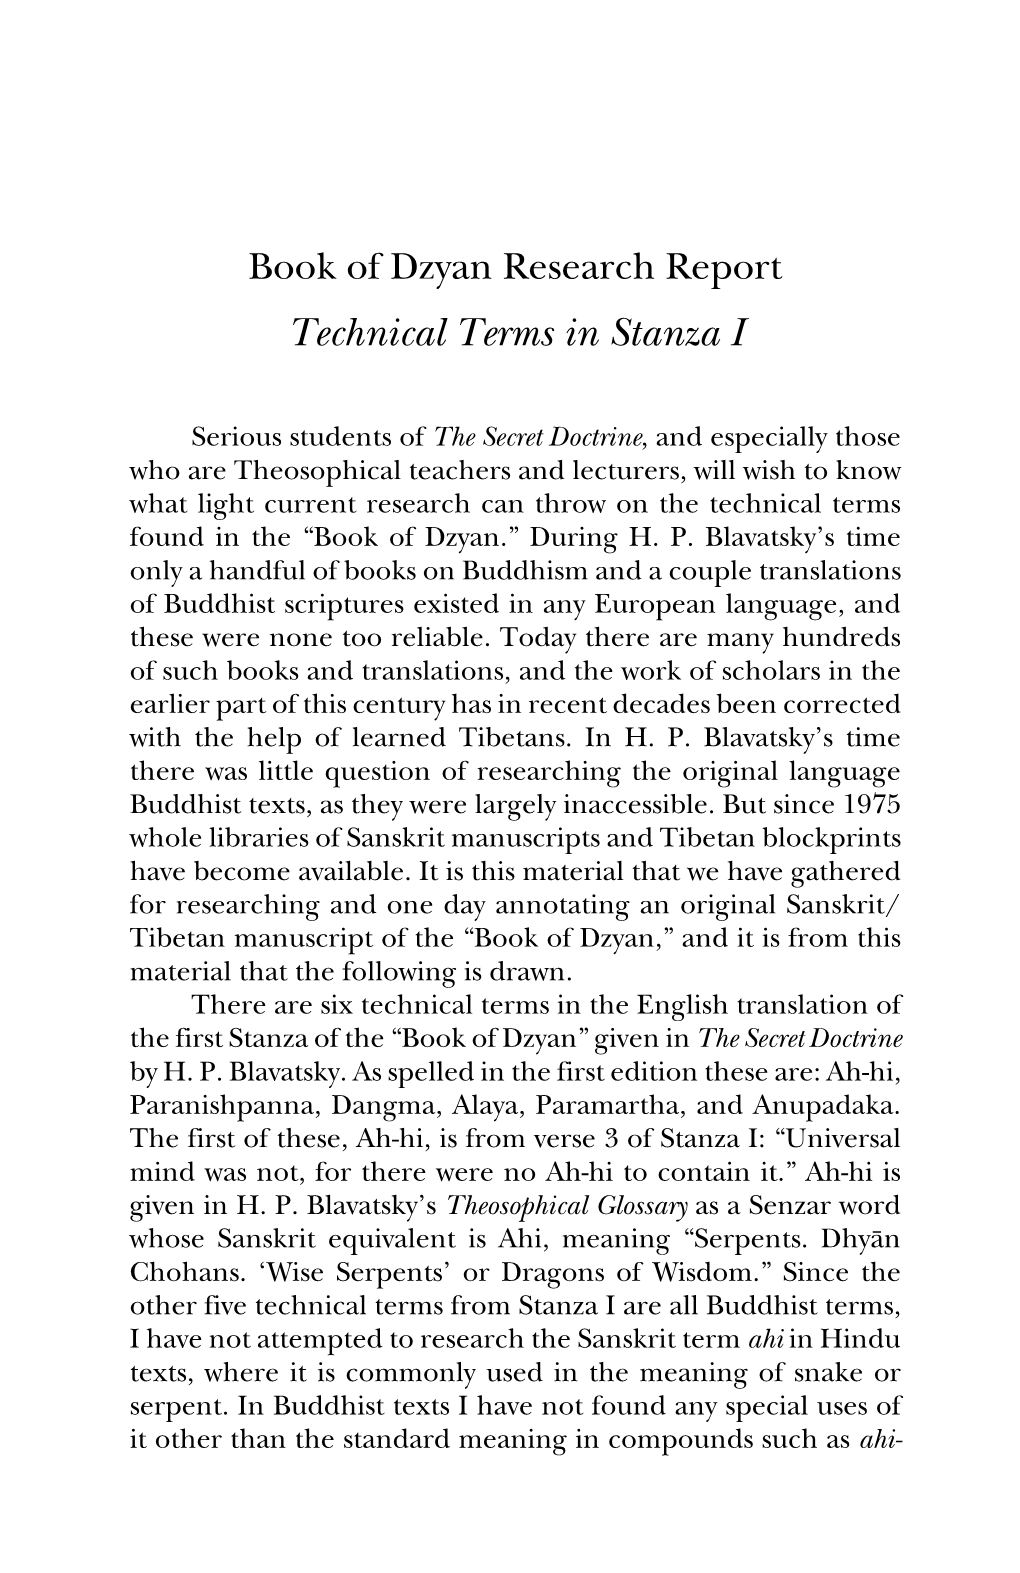 Technical Terms in Stanza I